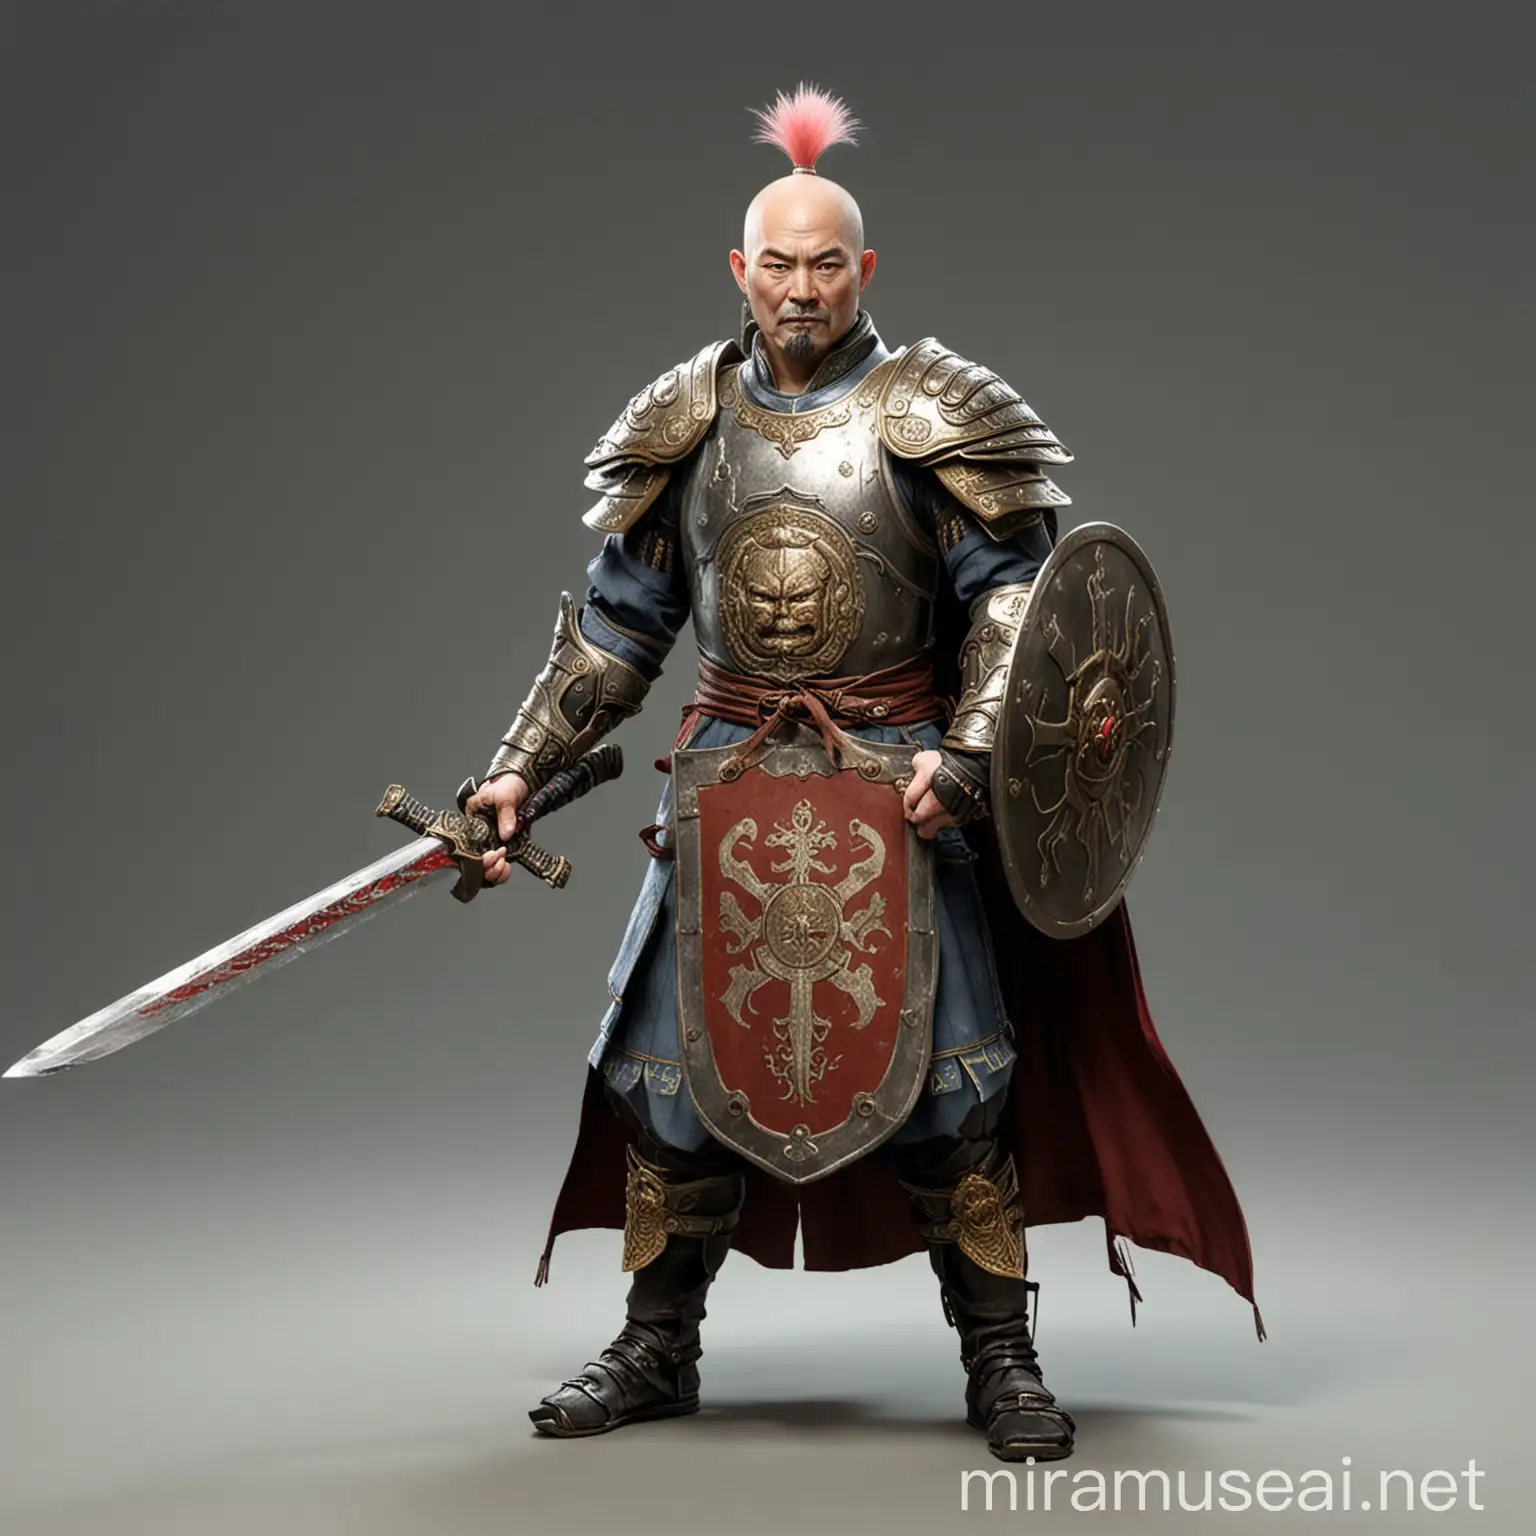 Fool mid age semi-bald Chinese paladin with sword and shield looking ridicoulus